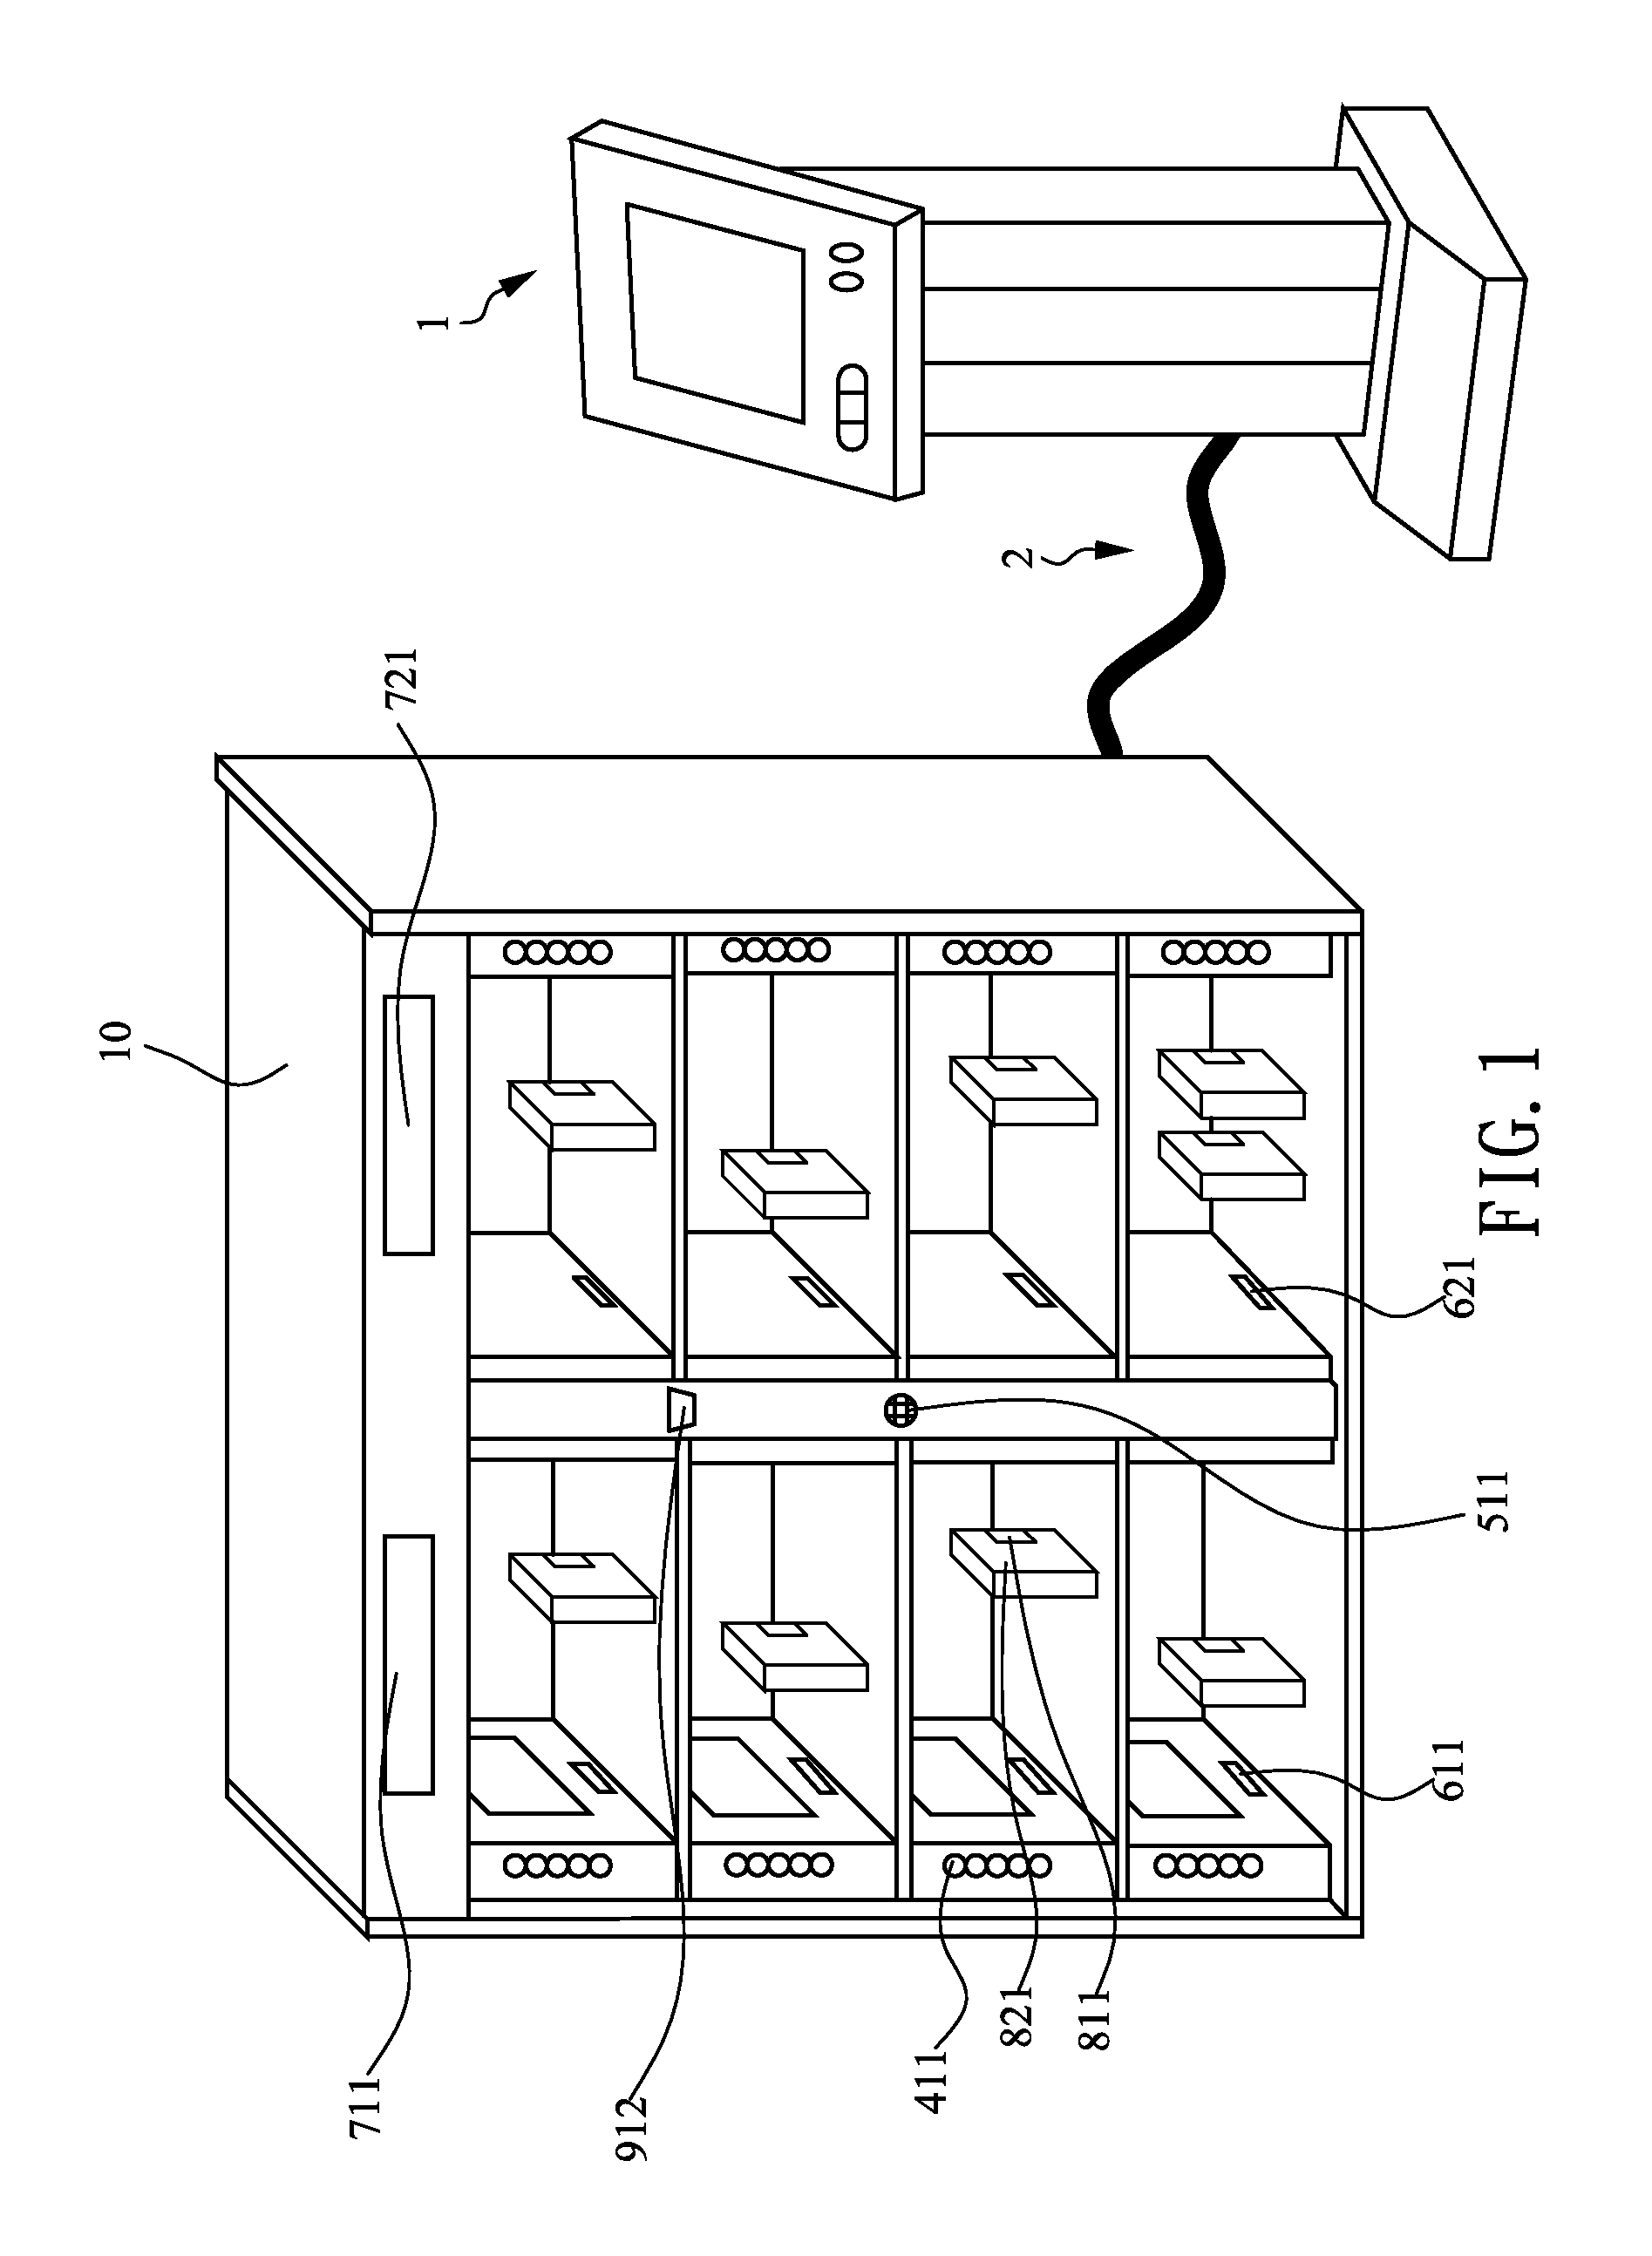 Rfid-based intelligent storage cabinet and the management method thereof